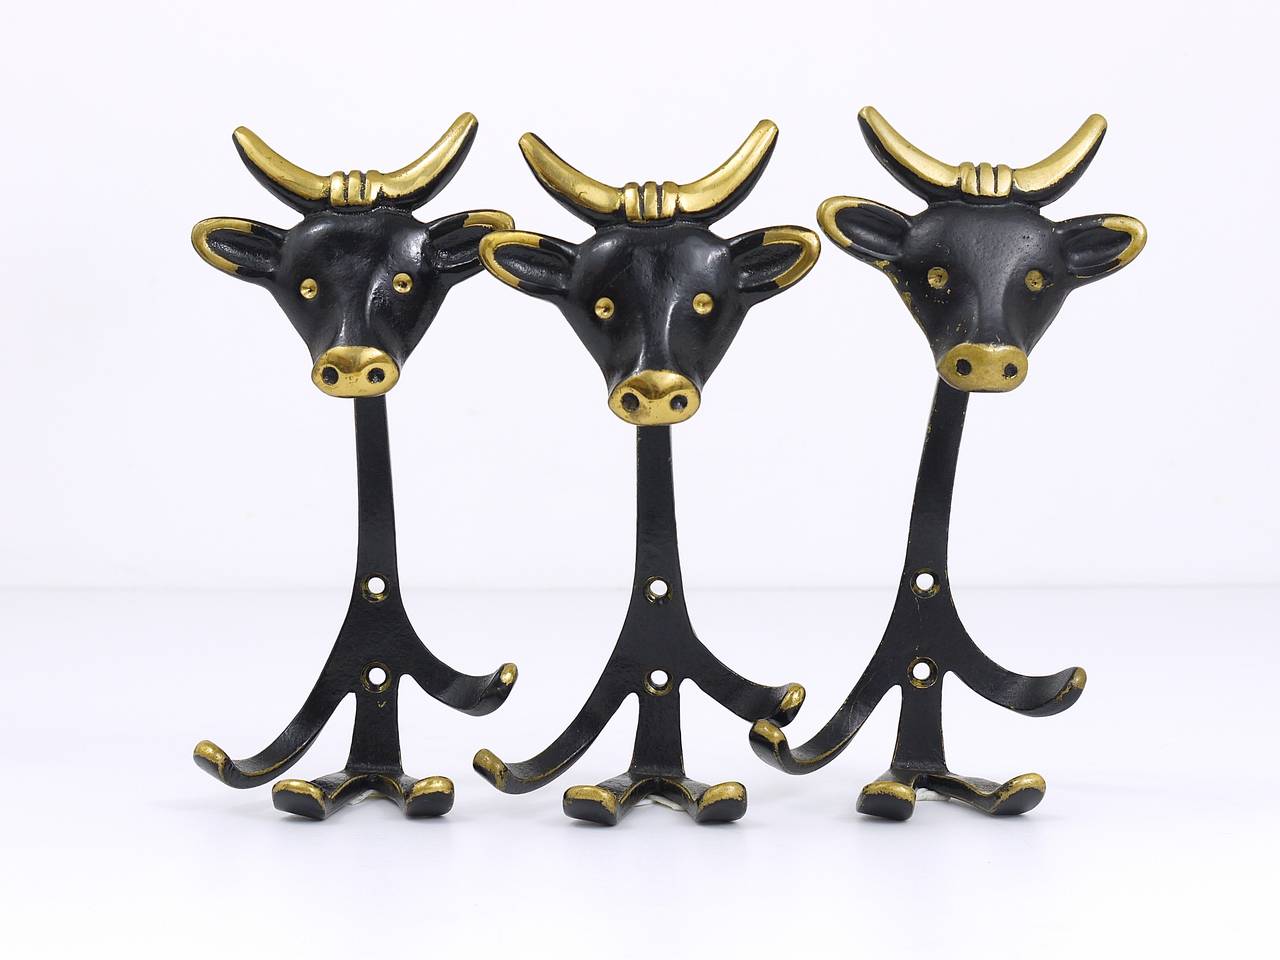 A set of 3 Viennese modernist brass wall coat hooks, displaying a cow. Designed in the 1950s by Walter Bosse, executed by Baller Vienna. Made of black finished brass. In very good condition with nice patina. Each hook has a height of 7